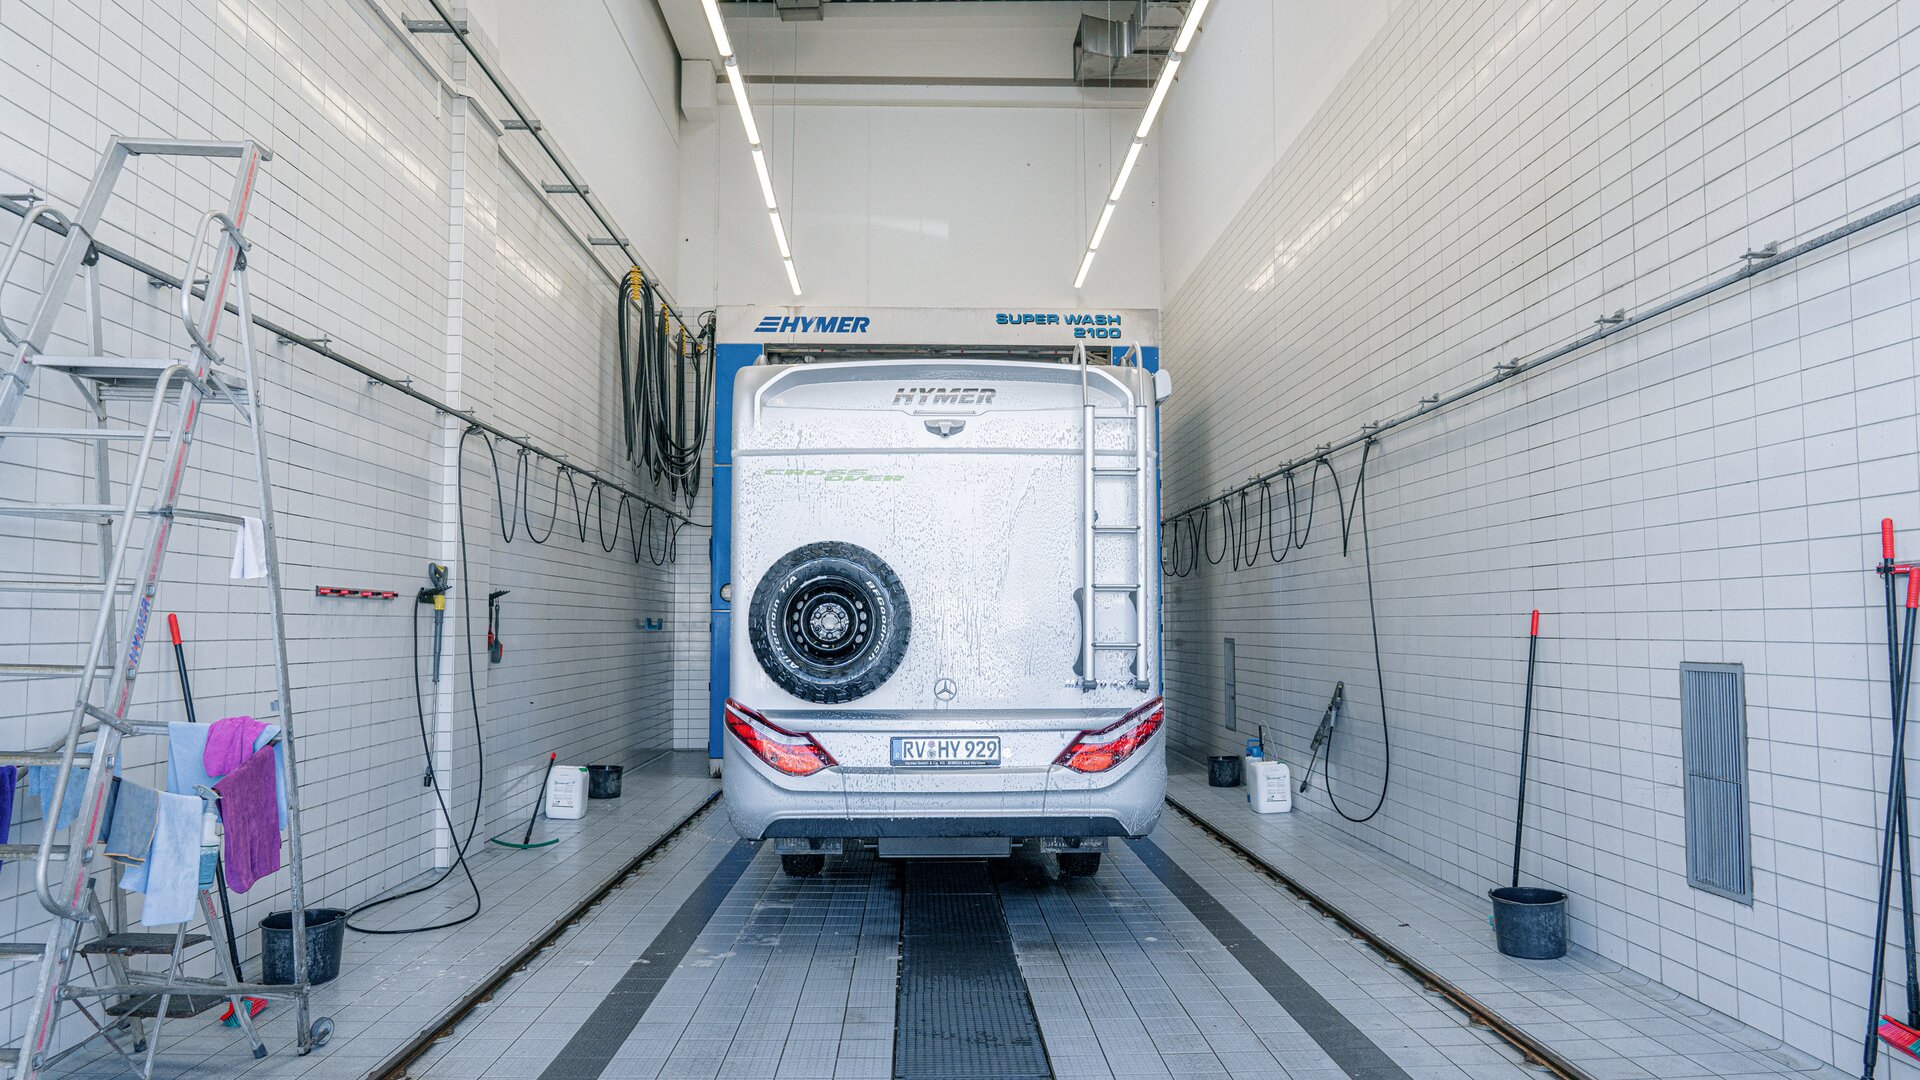 Rear view of the HYMER motorhome with spare wheel on back in the wash hall